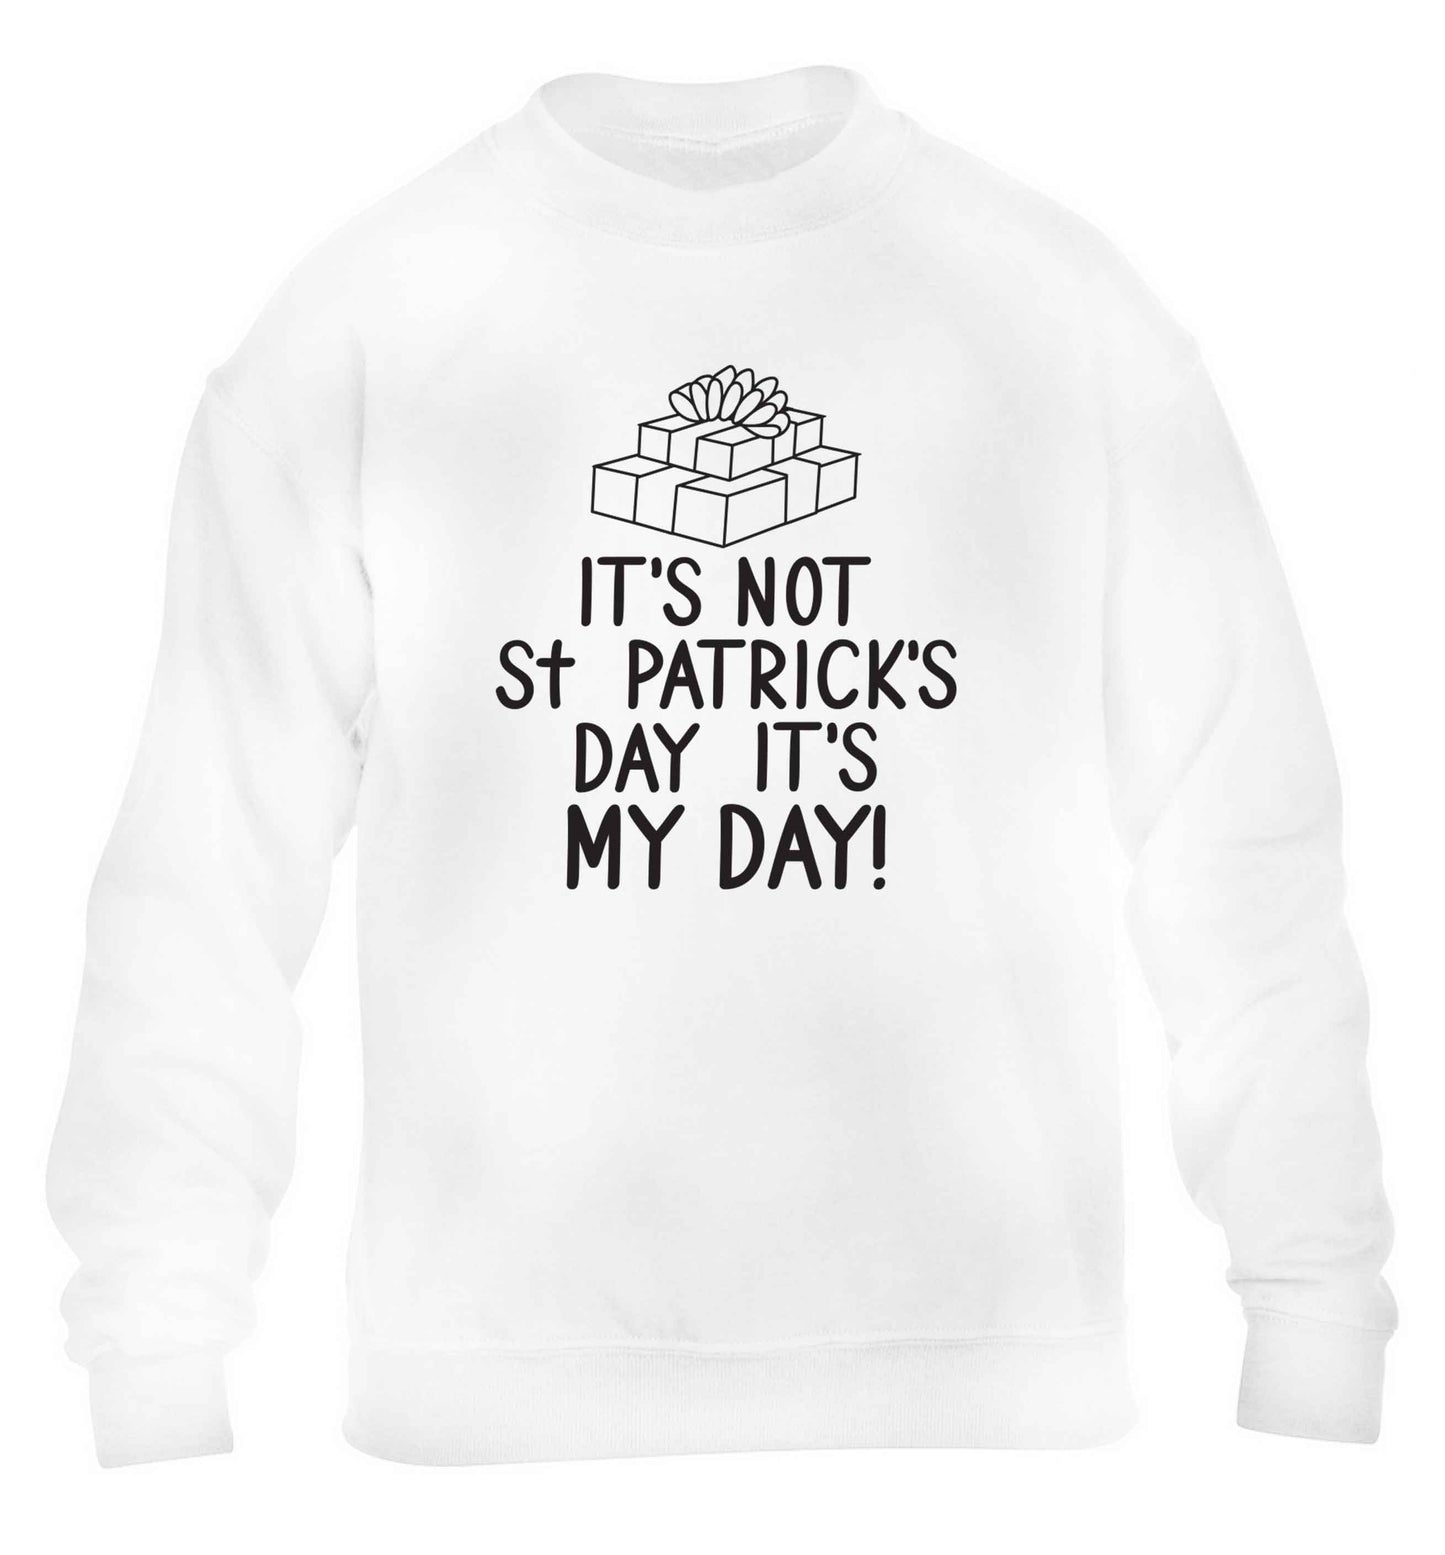 Funny gifts for your mum on mother's dayor her birthday! It's not St Patricks day it's my day children's white sweater 12-13 Years